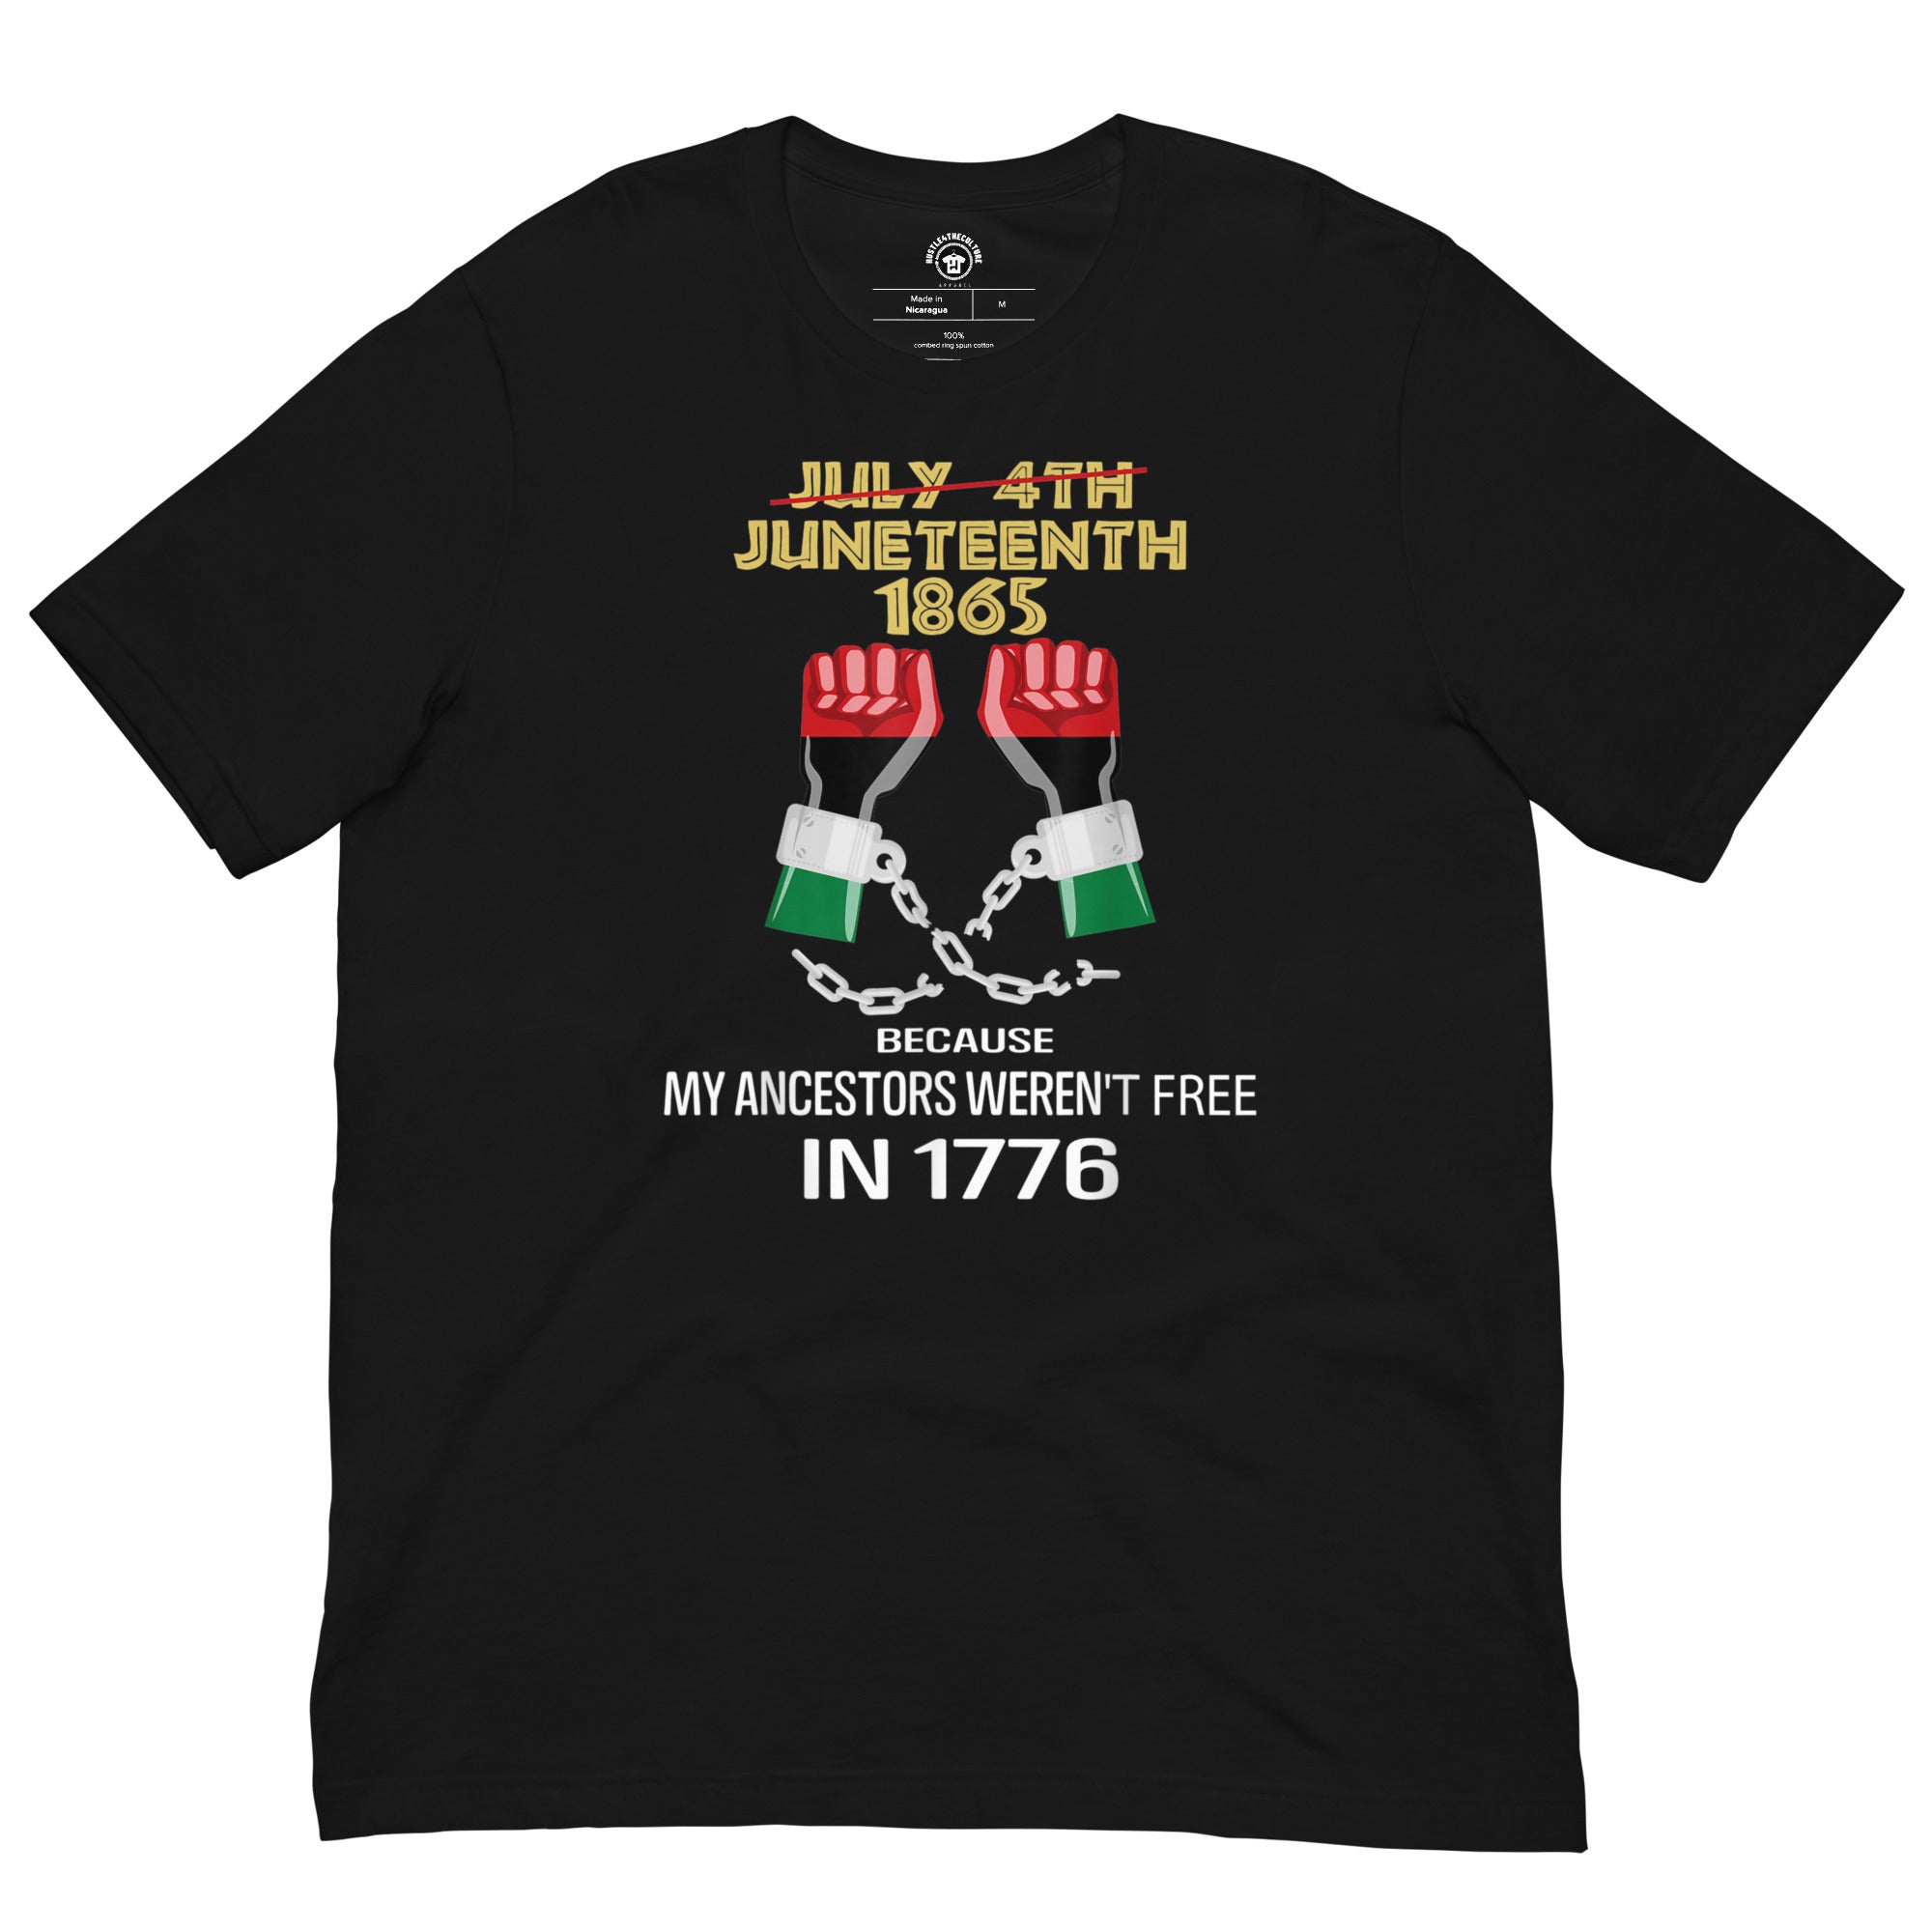 -July-4Th- Juneteenth 1865 - Graphic Bootleg